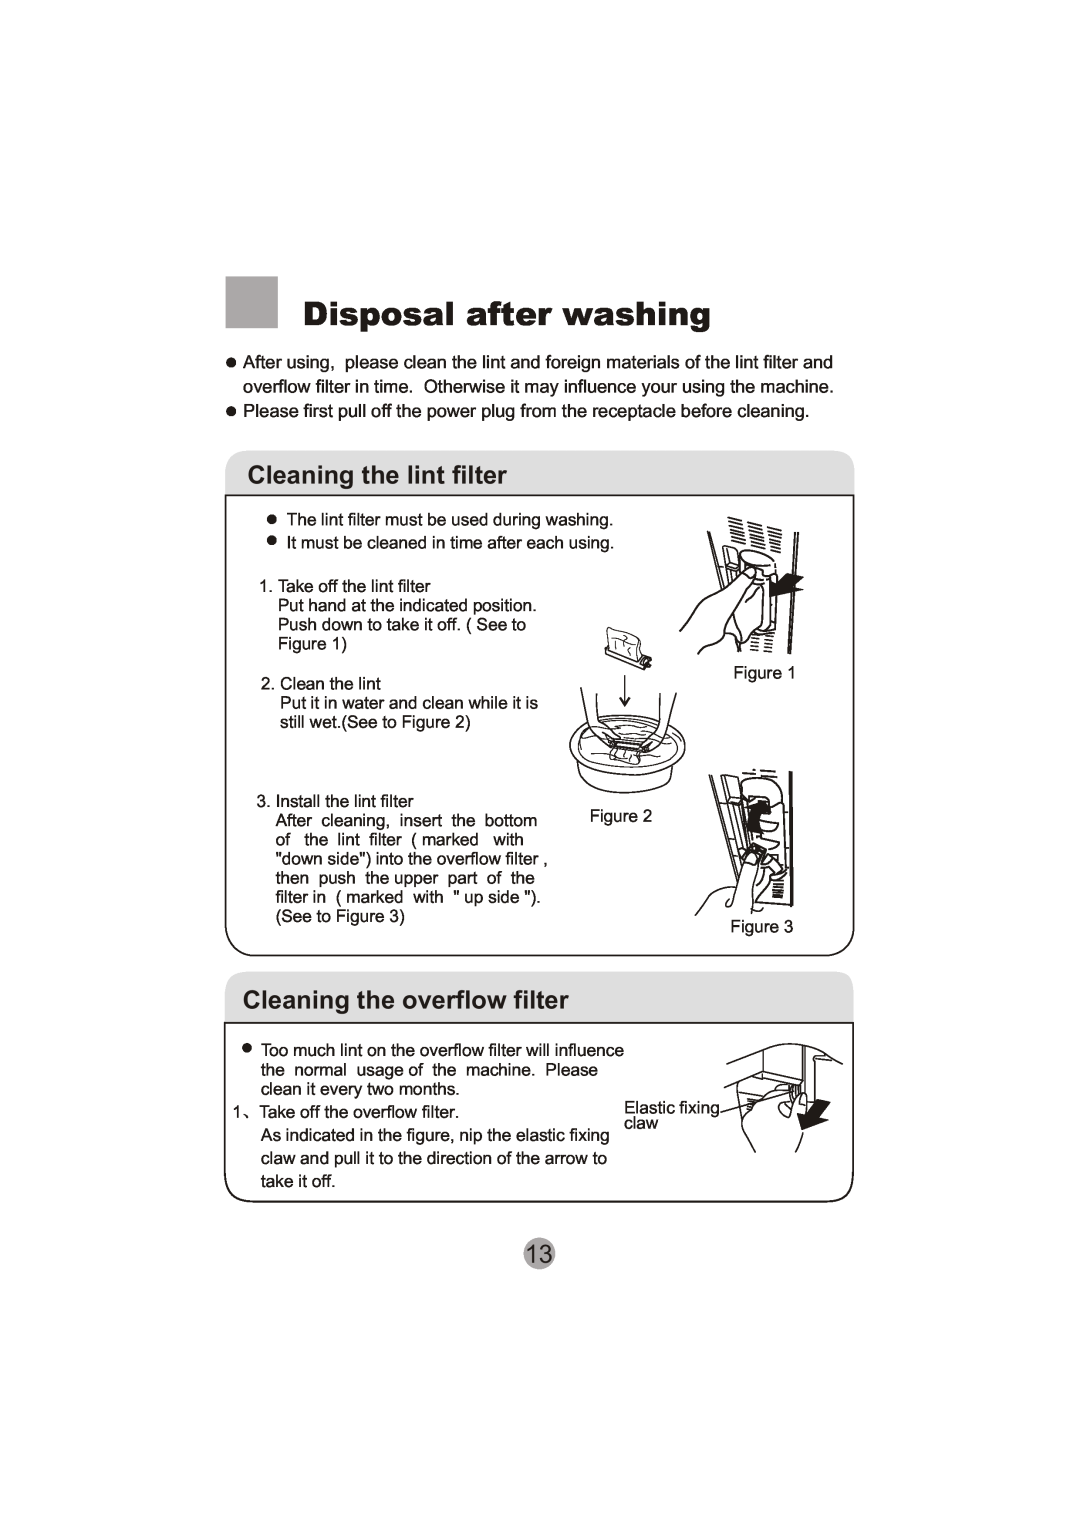 Haier XPB60-113S user manual Disposal after washing, Cleaning the lint filter, Cleaning the overflow filter 